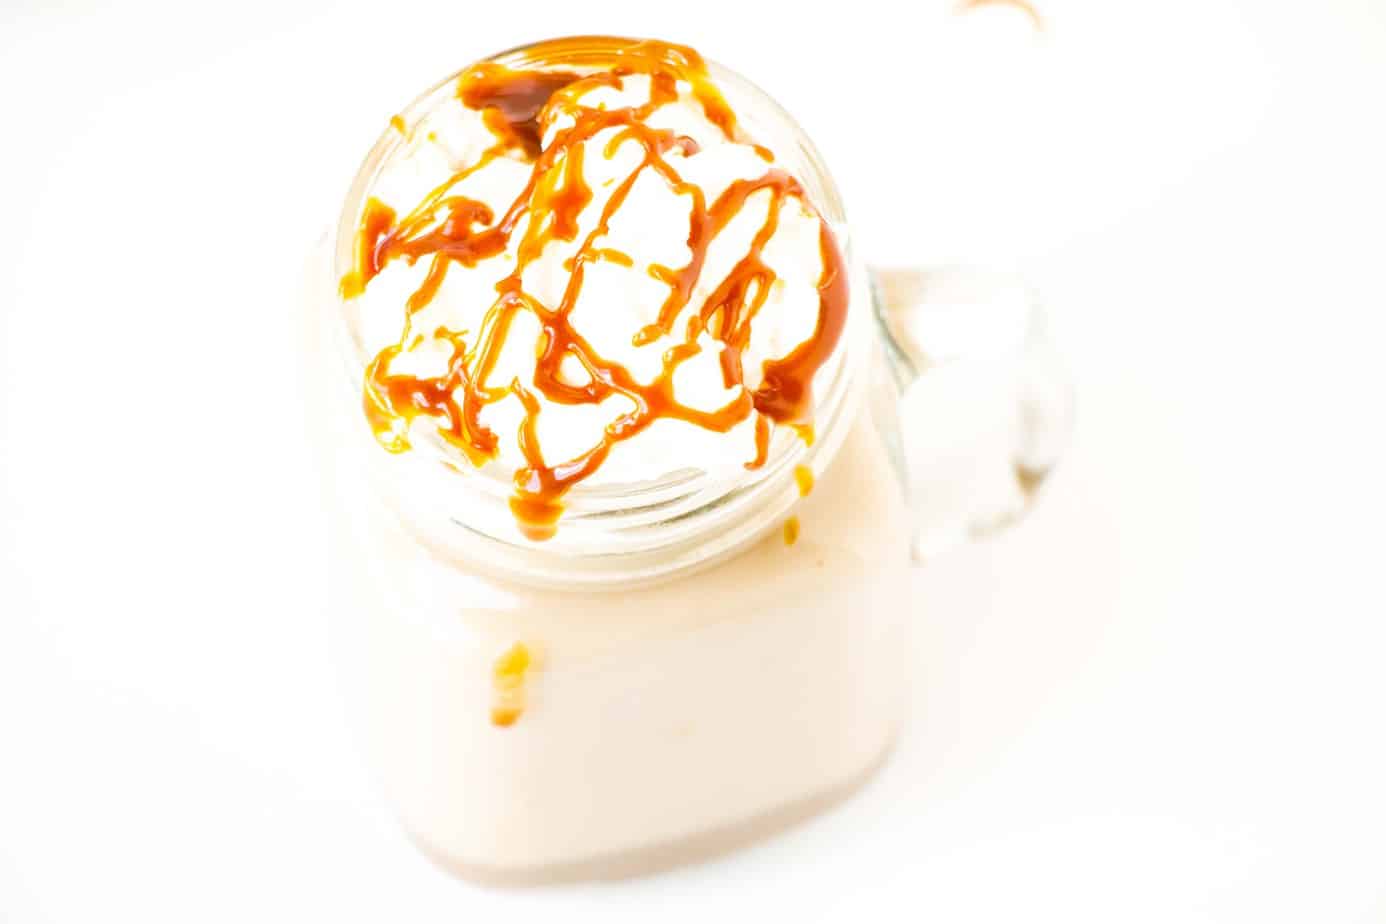 Caramel Pumpkin Spice Latte with sauce and whipped cream.